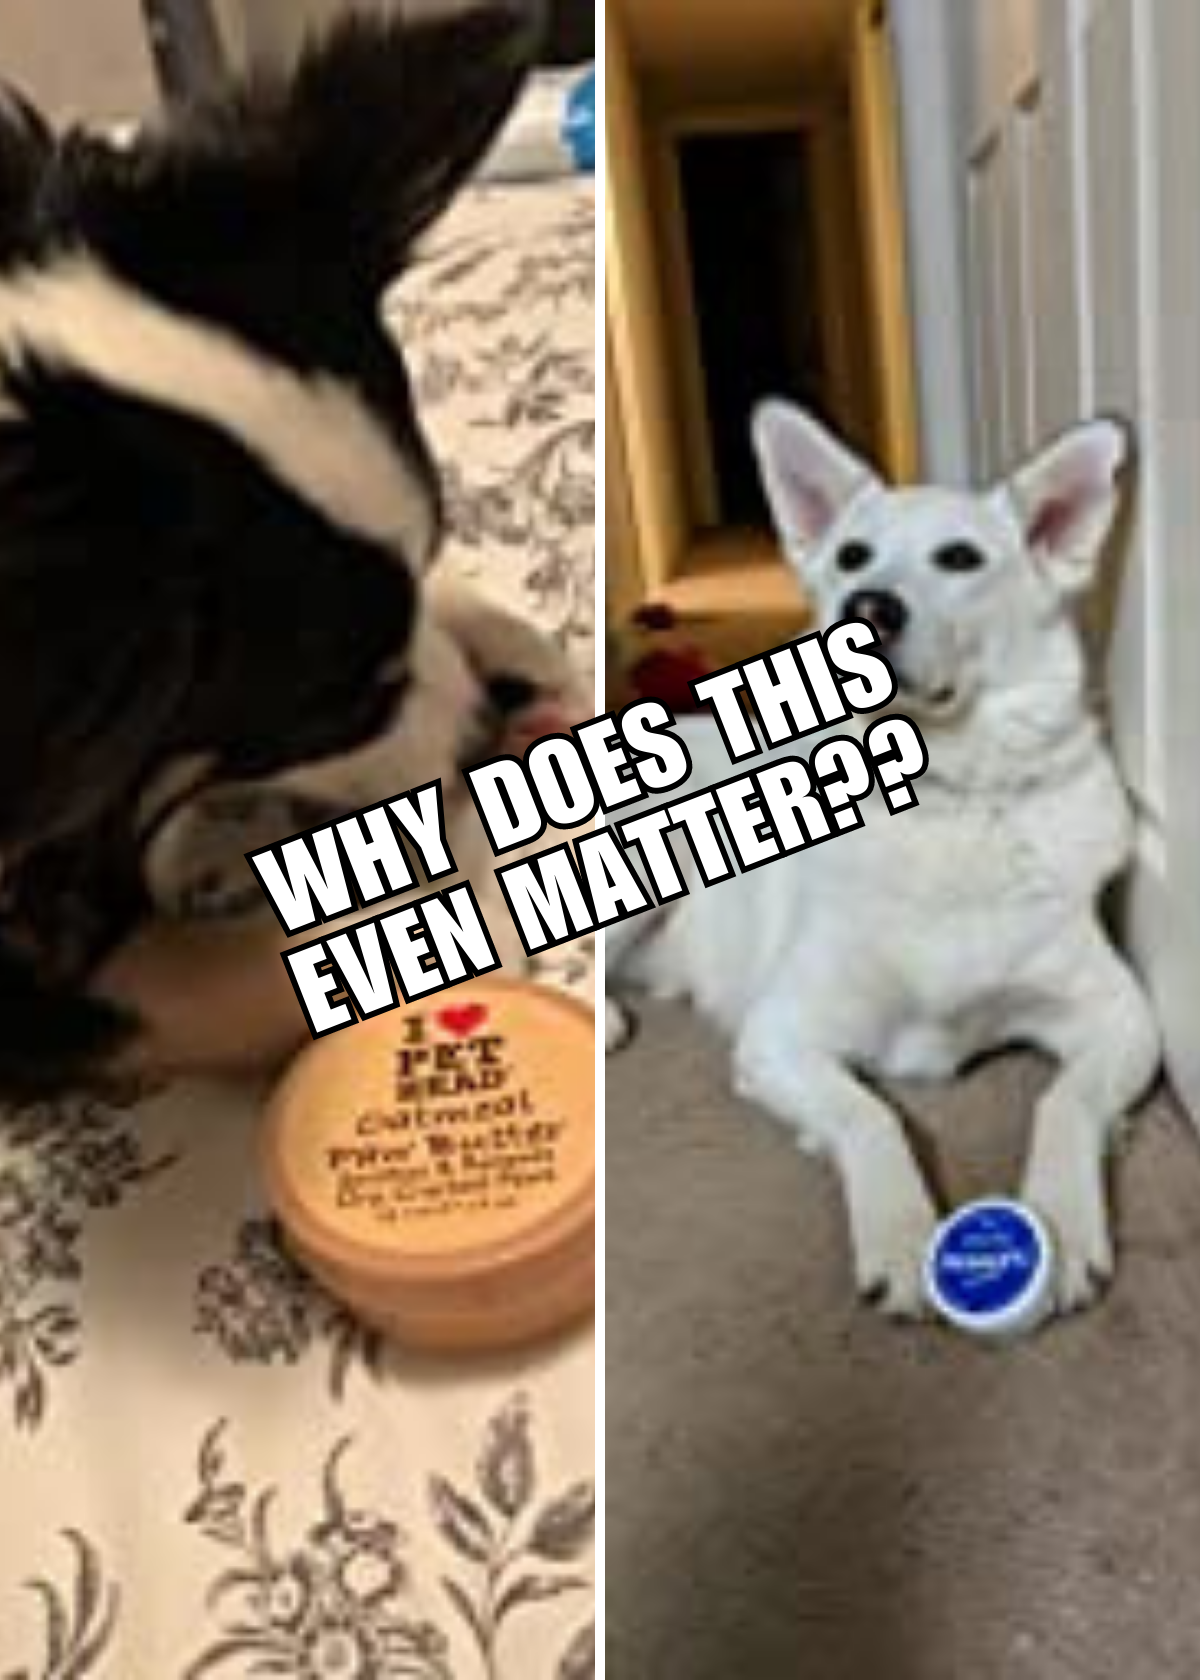 Best Paw Balms For Dogs